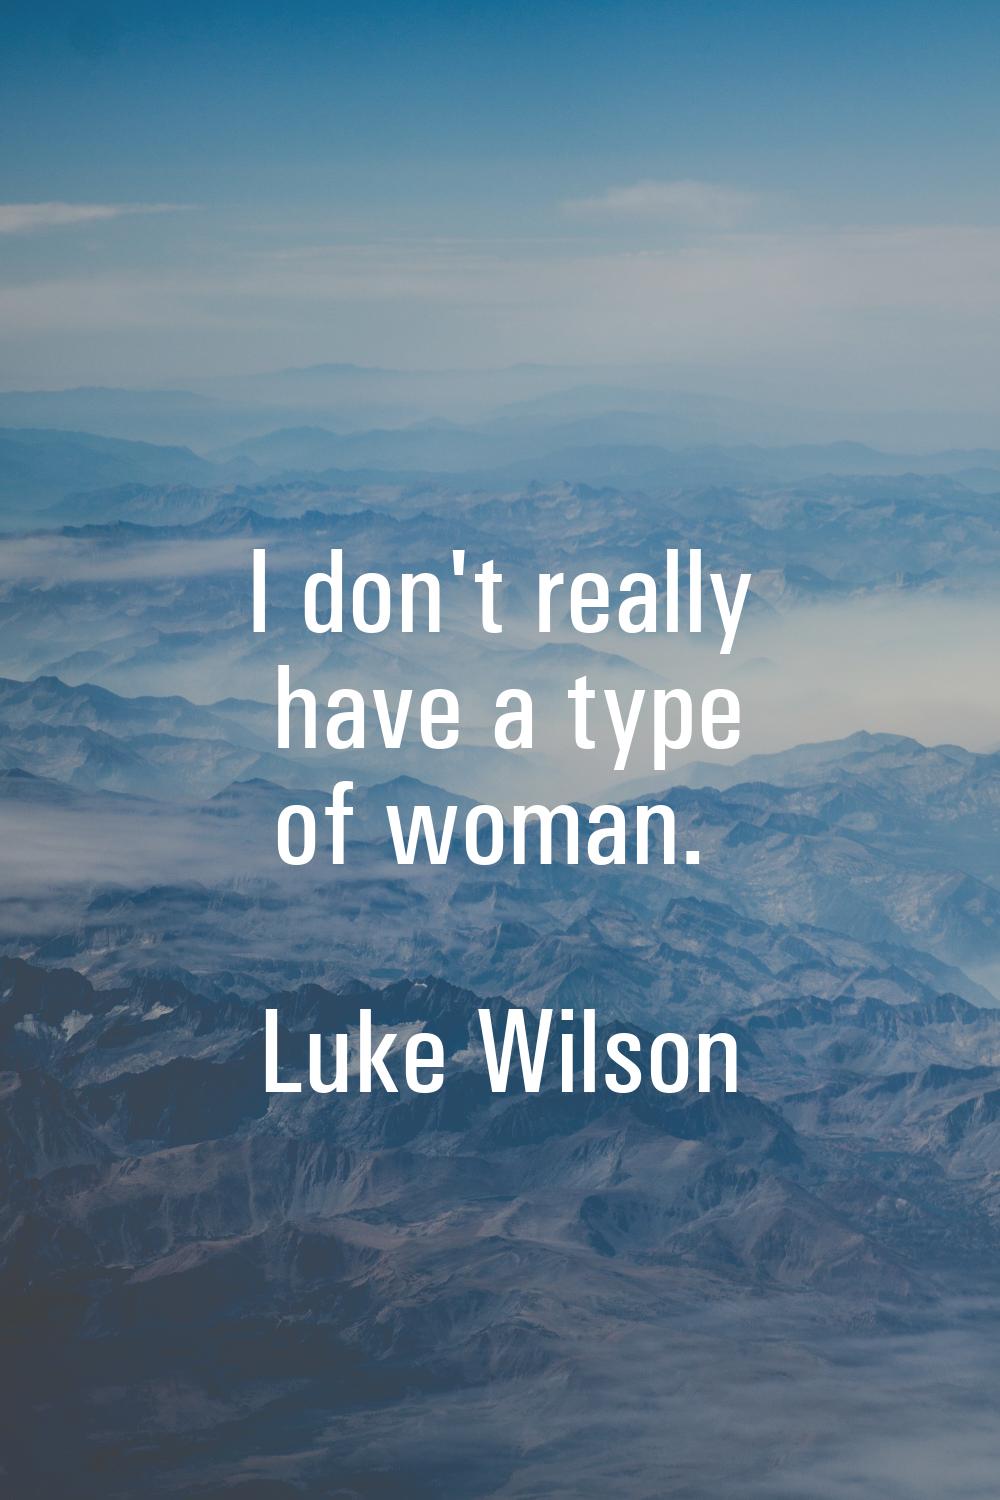 I don't really have a type of woman.